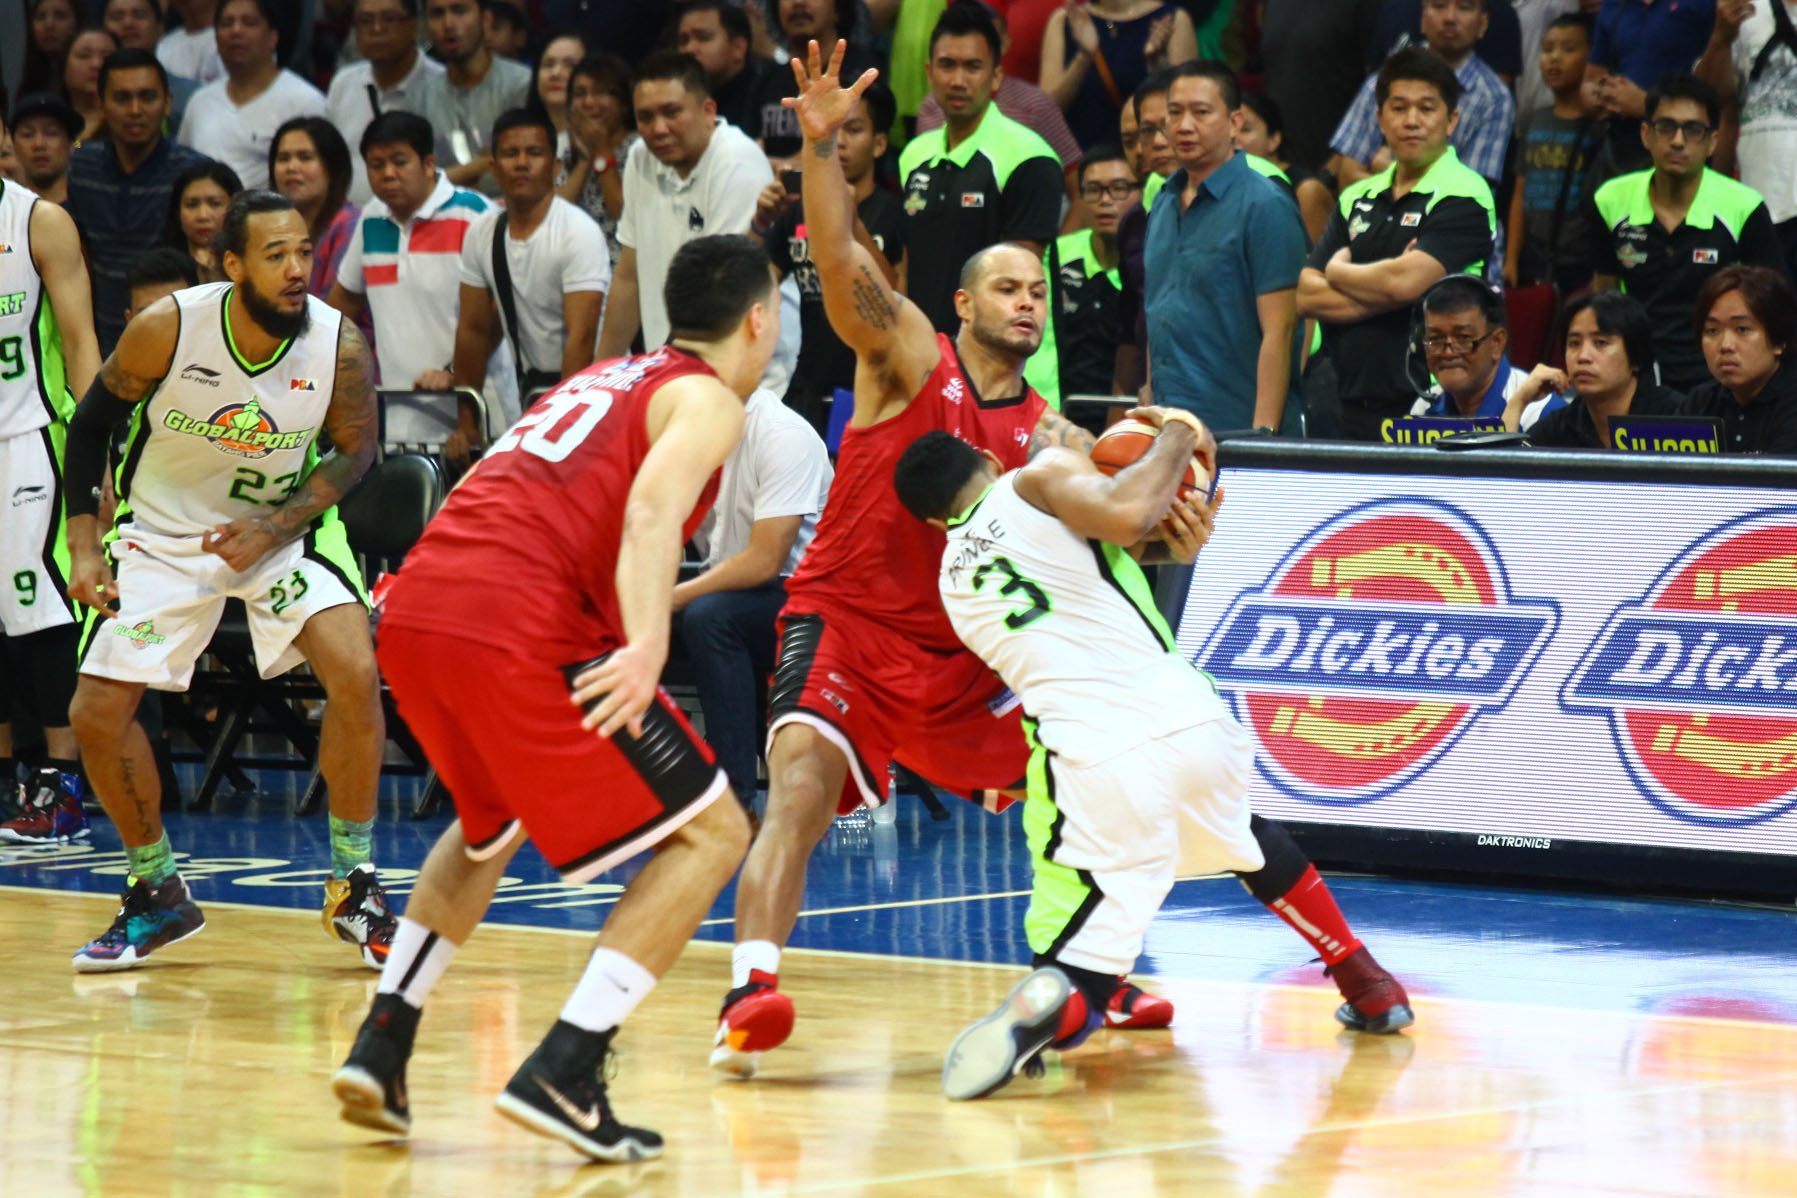 Fans throw coins at Washington after controversial Ginebra-Globalport game – report